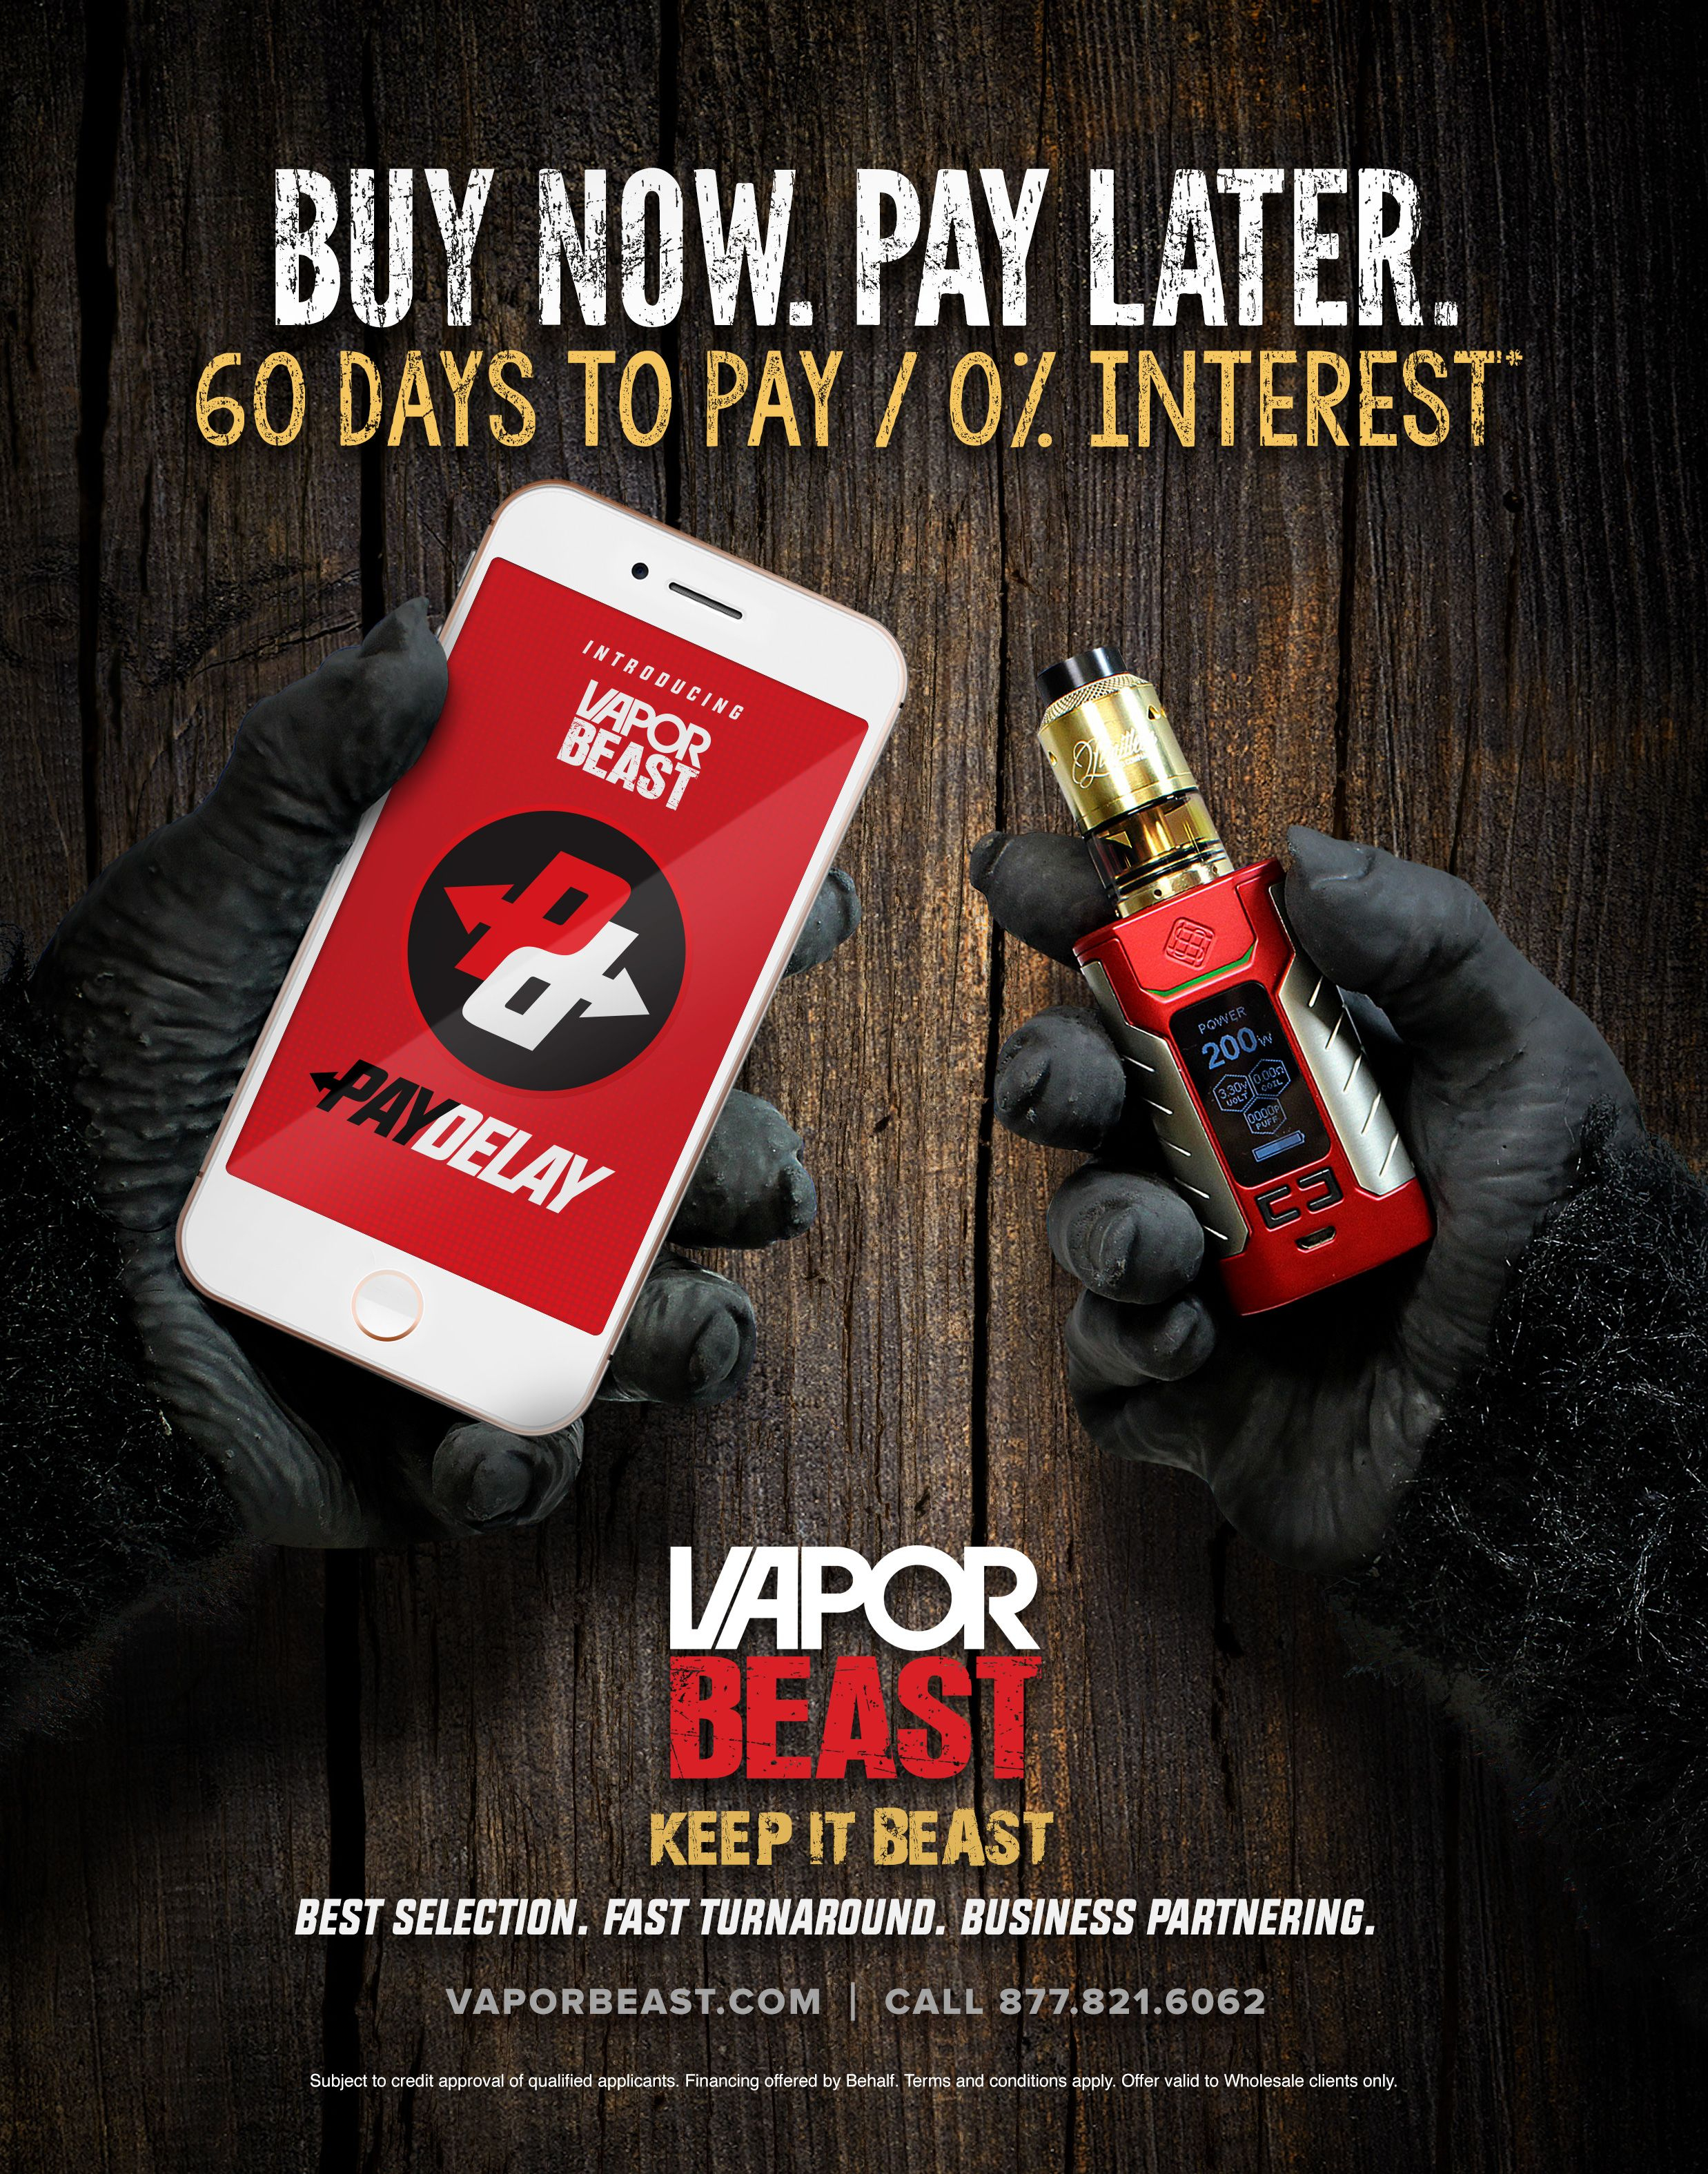 Buy Now, Pay Later! - VaporBeast Blog